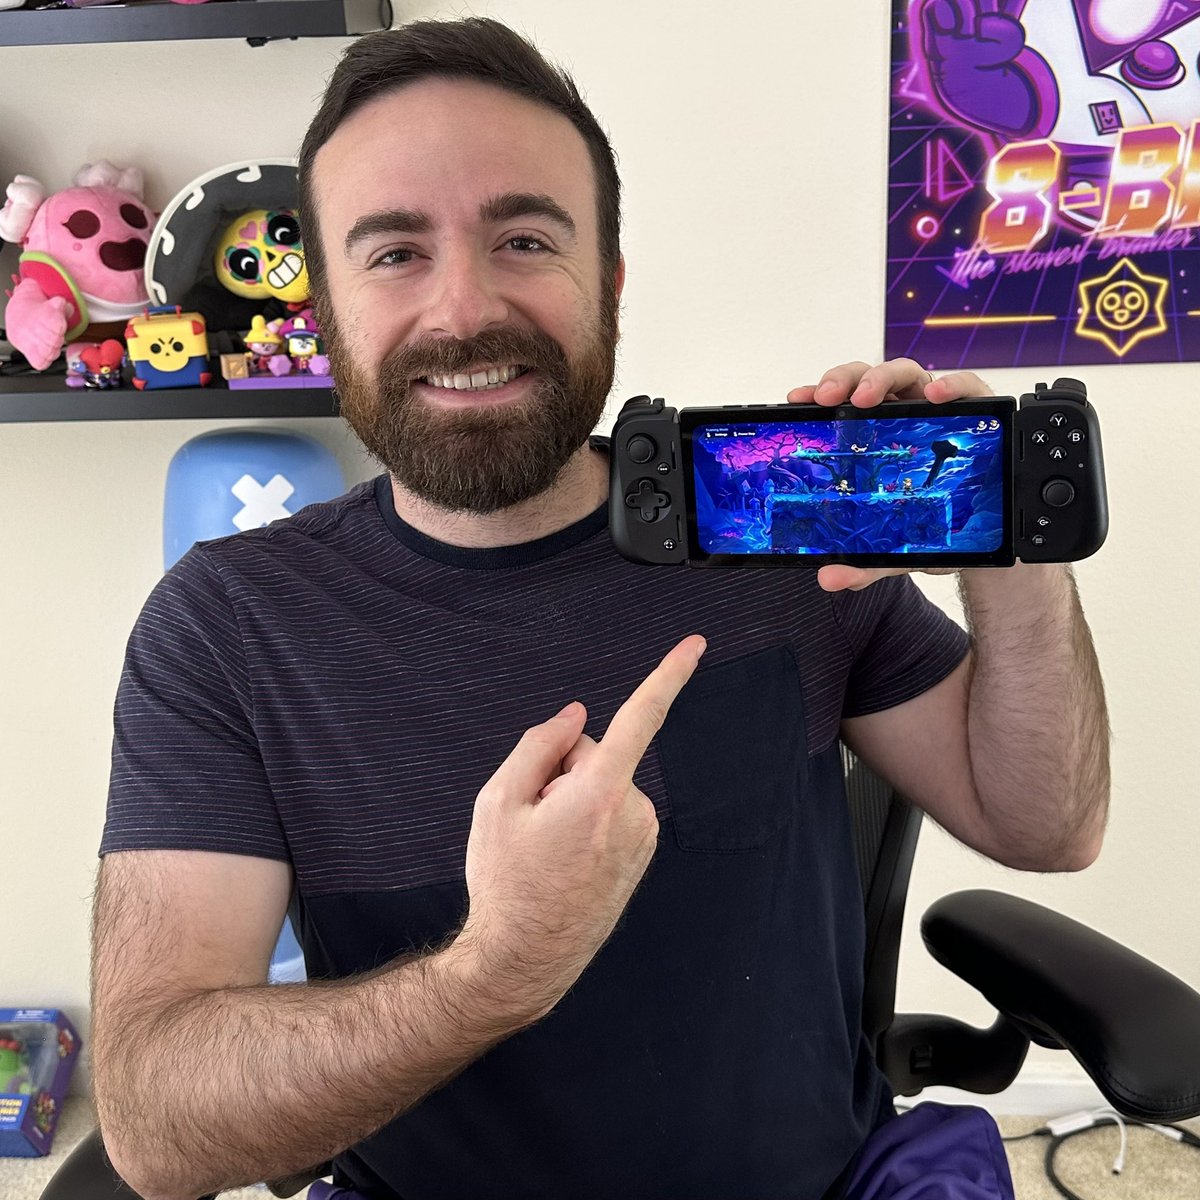 Time to level up your gaming! The new and improved @Razer Nexus companion app for the Razer Edge and Razer Kishi V2 Family makes it even easier to find new & free games! 😎 PLUS who doesn't want to game with this Virtual Controller mode??! 🤯 #ad